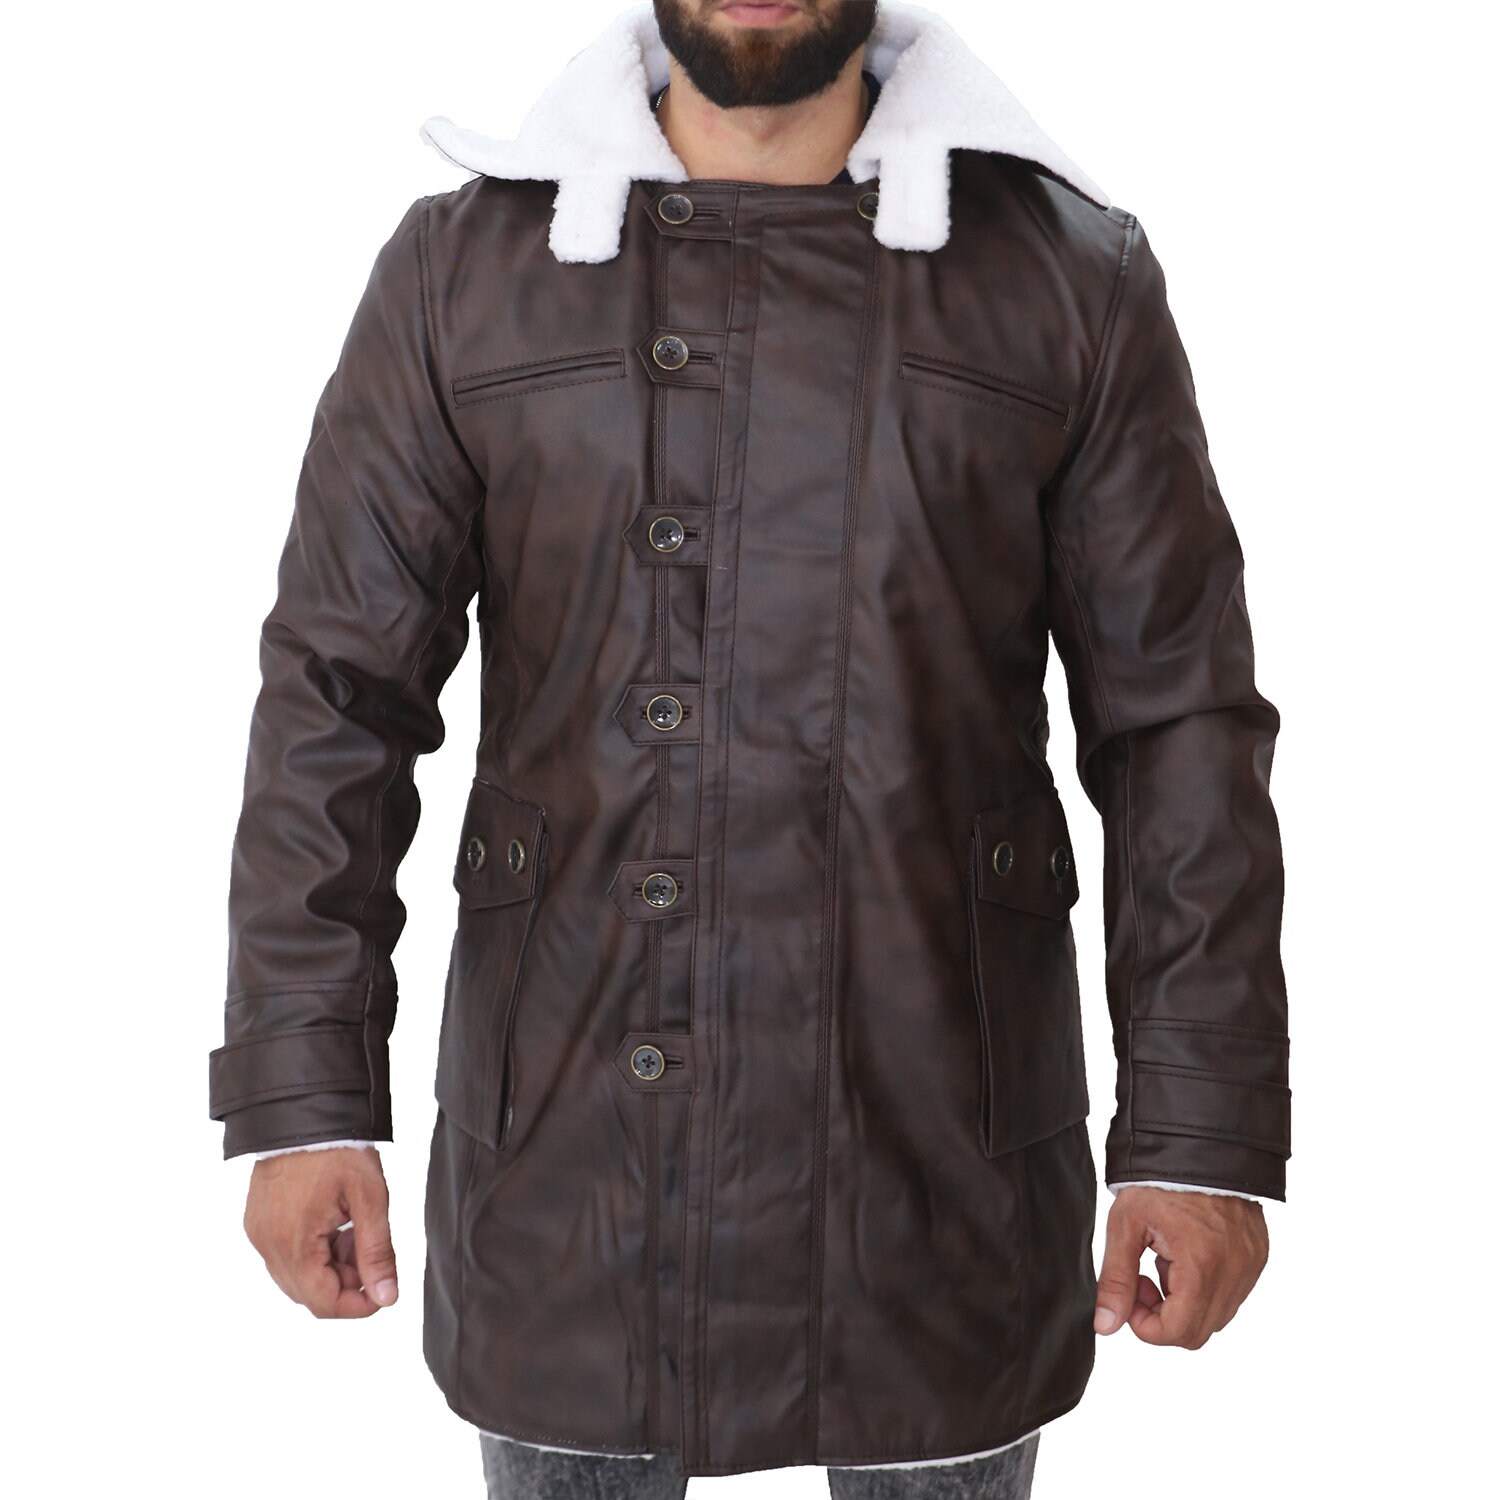 Tom Hardy The Dark Knight Rises Real Leather Bane Coat